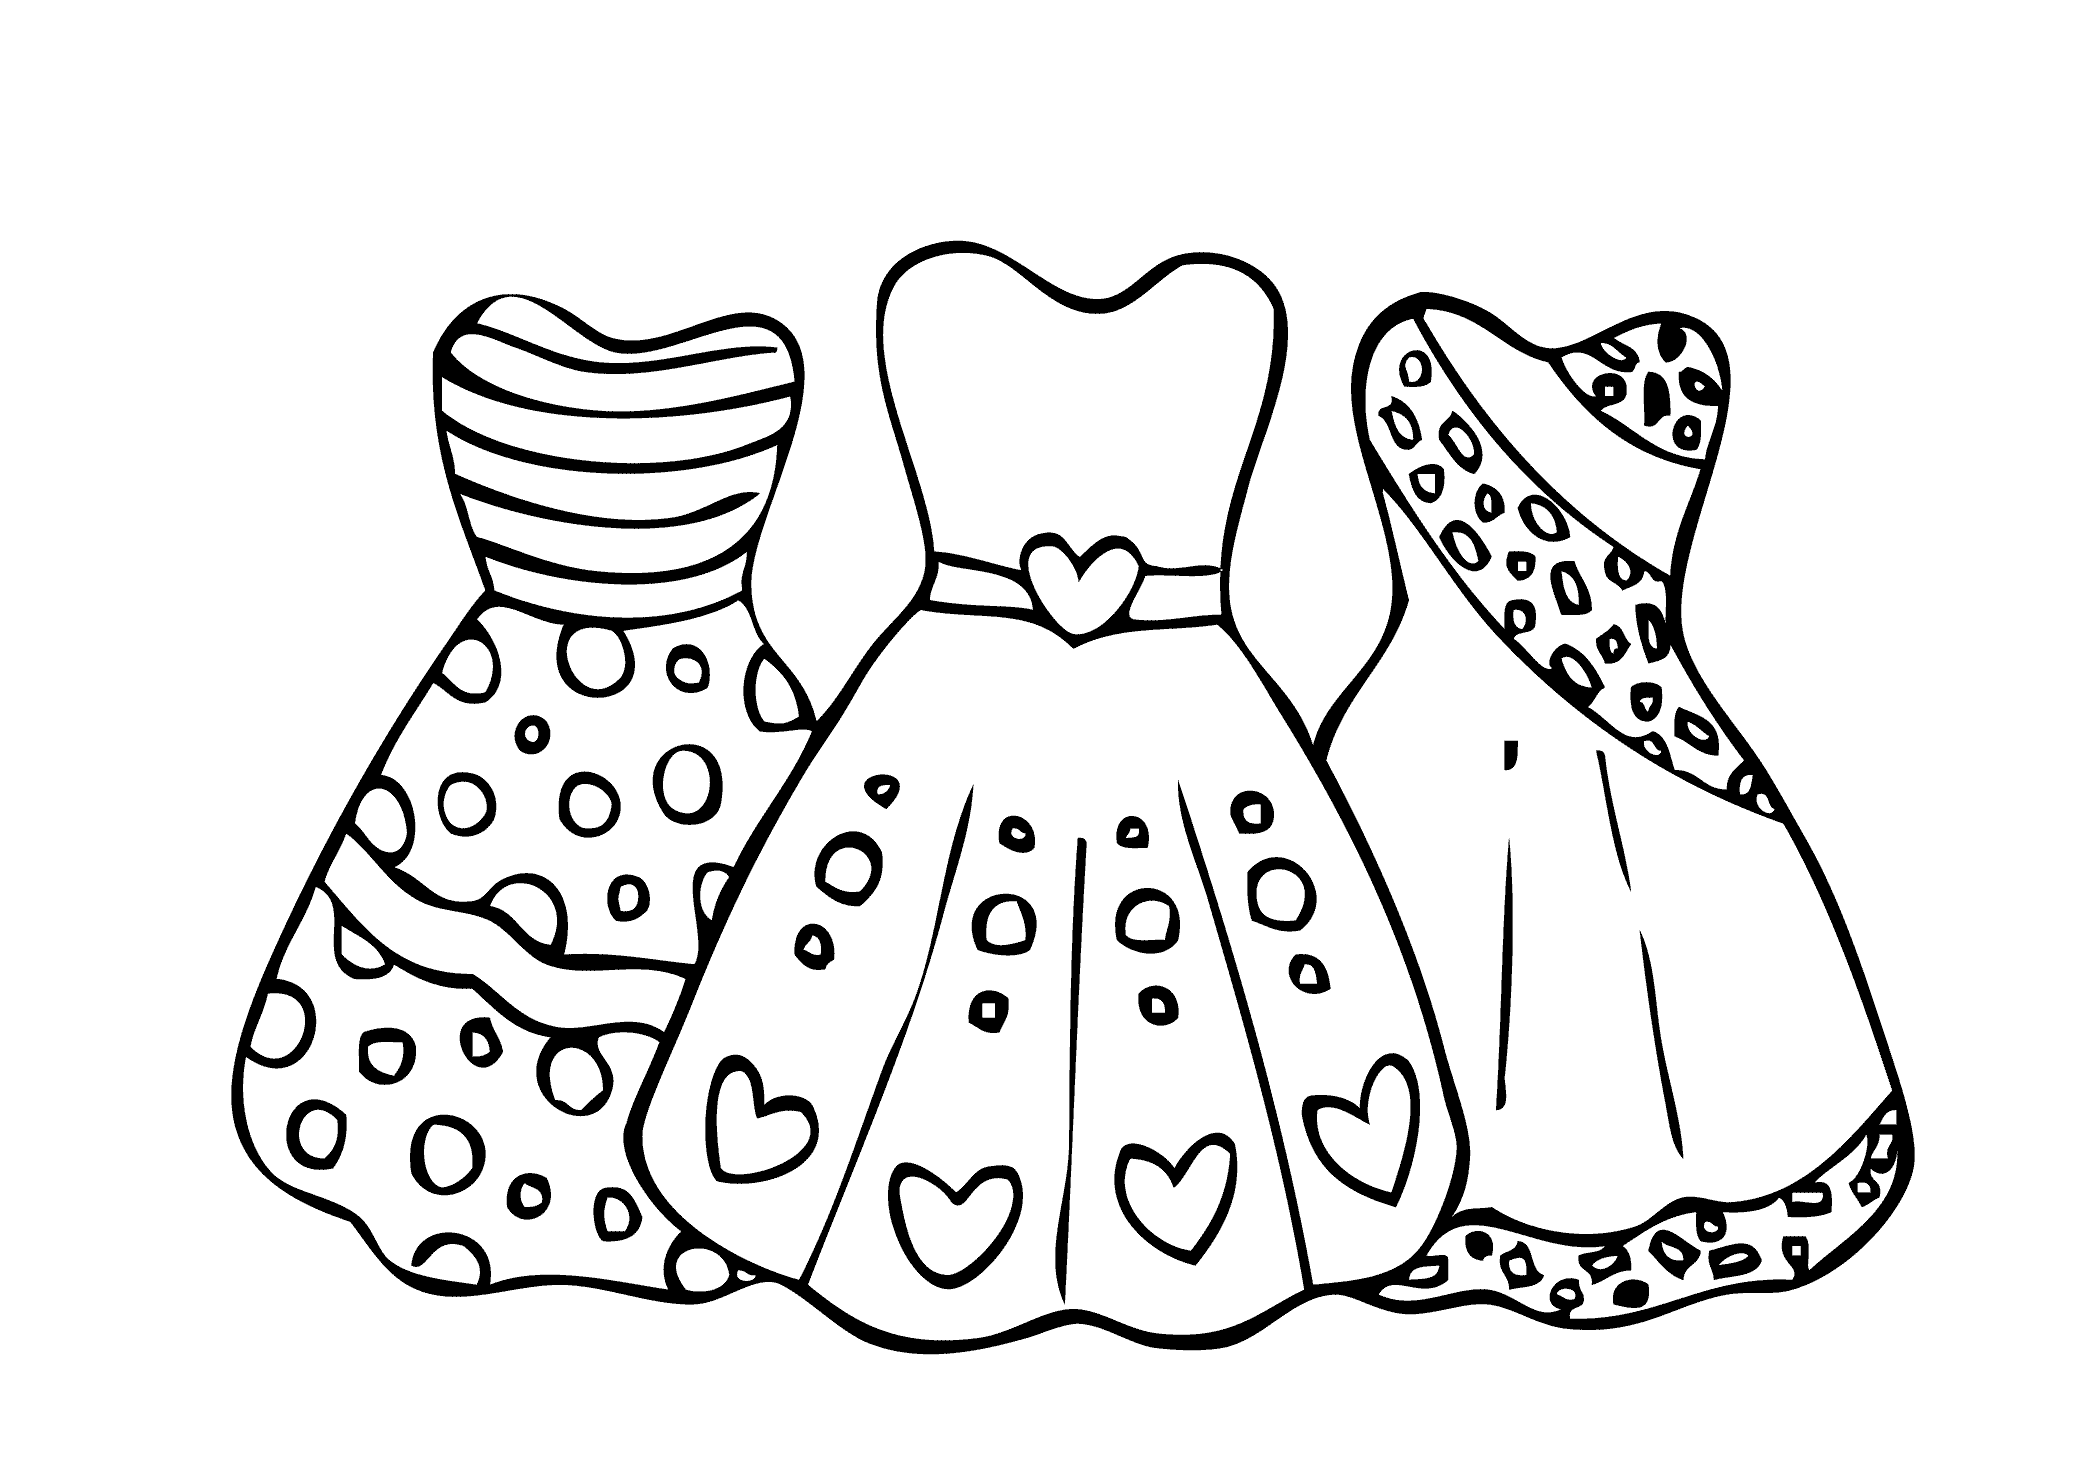 Girl Dresses Coloring Pages Coloring Home